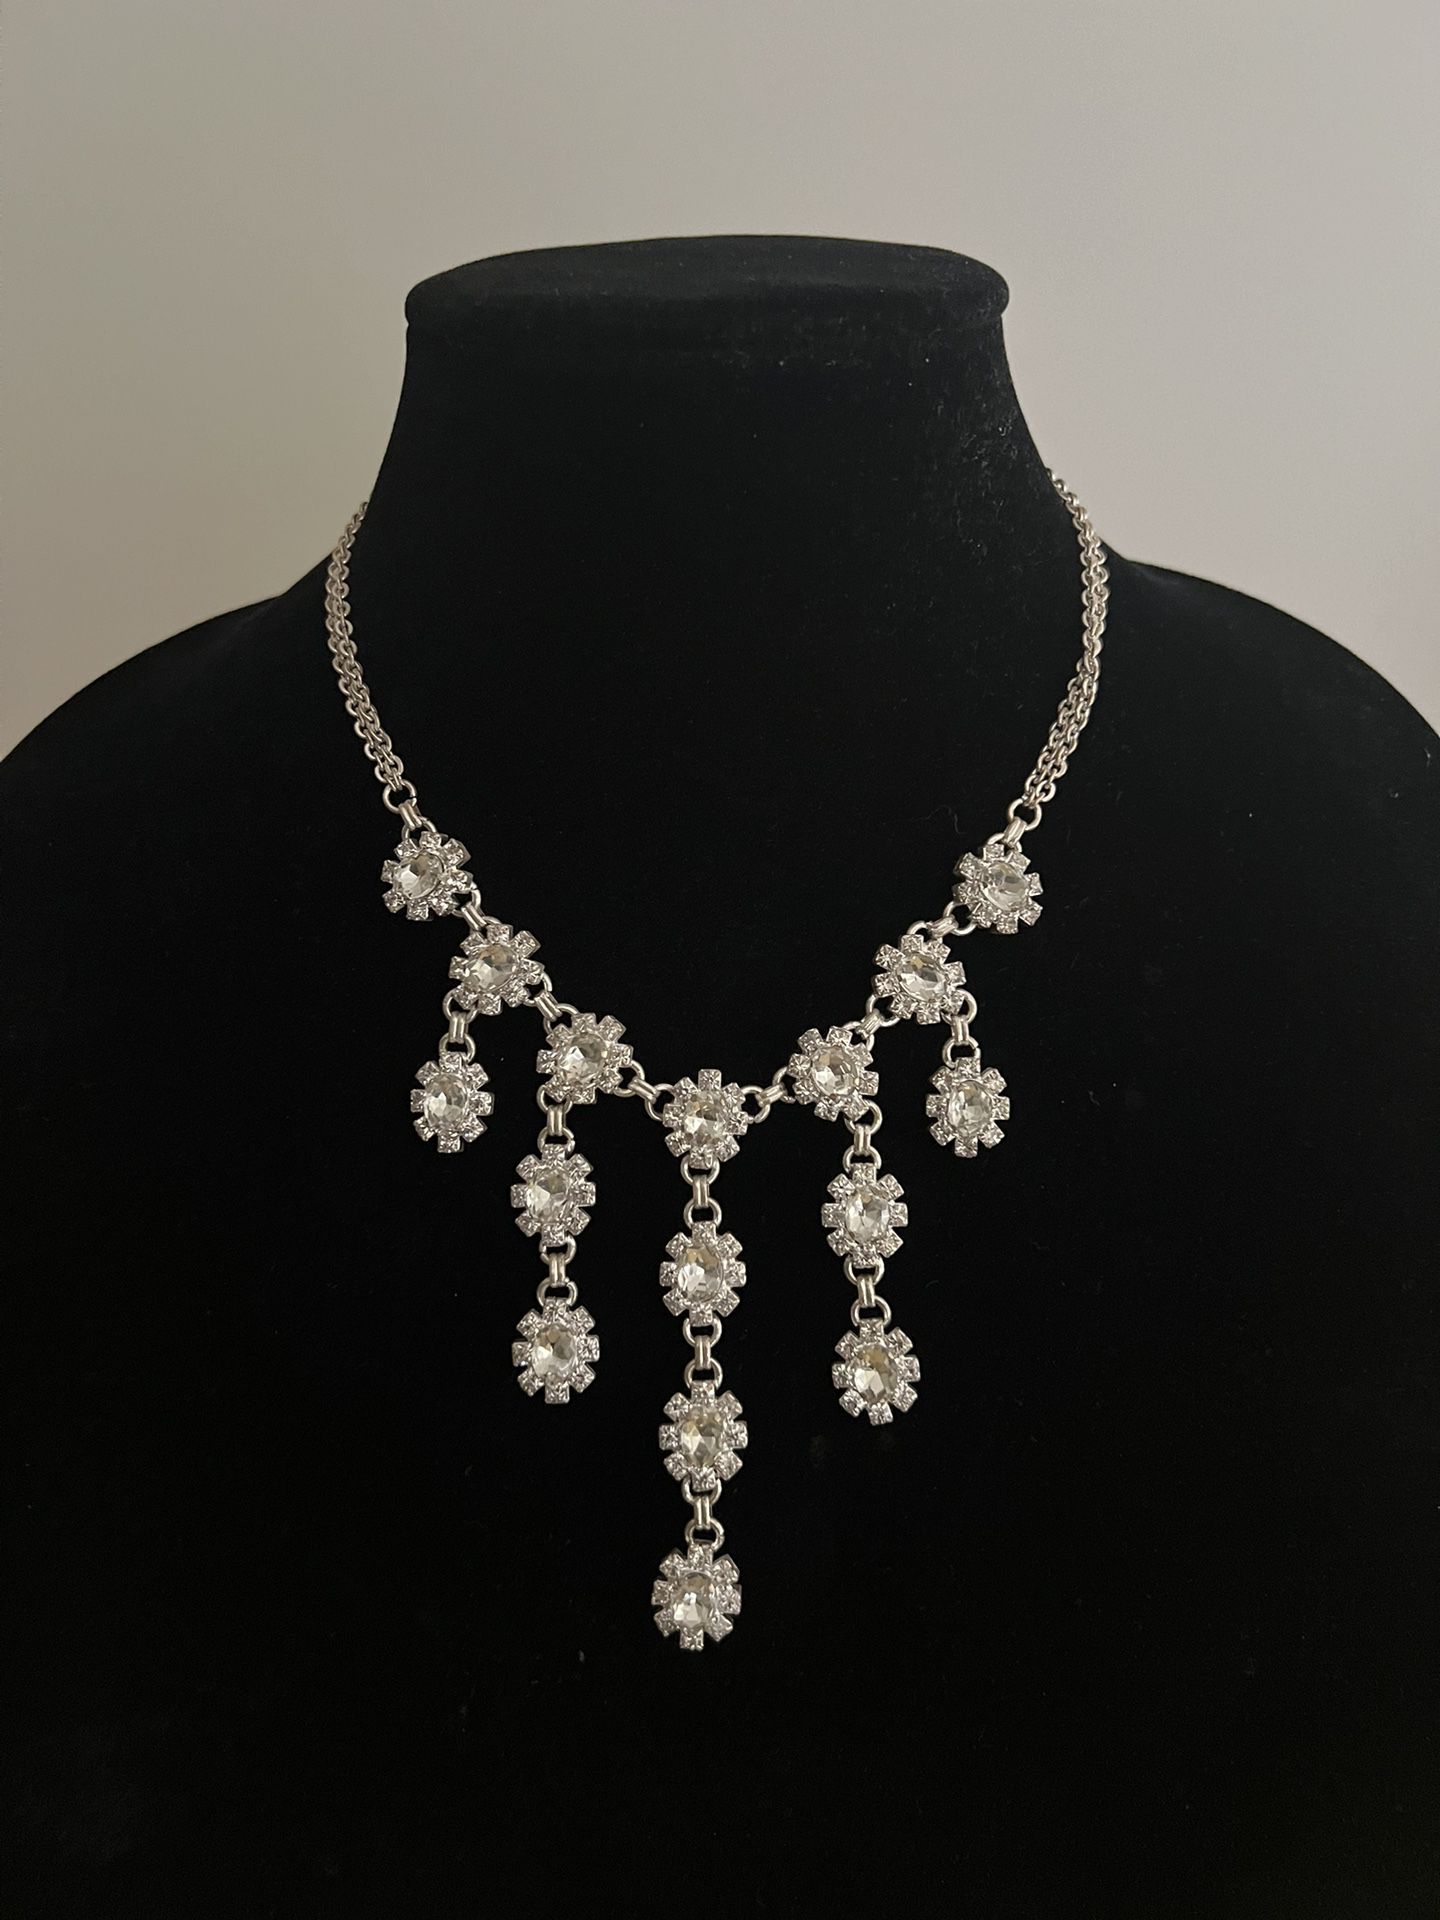 Beautiful Necklace for Prom, Wedding Or Quinceniera